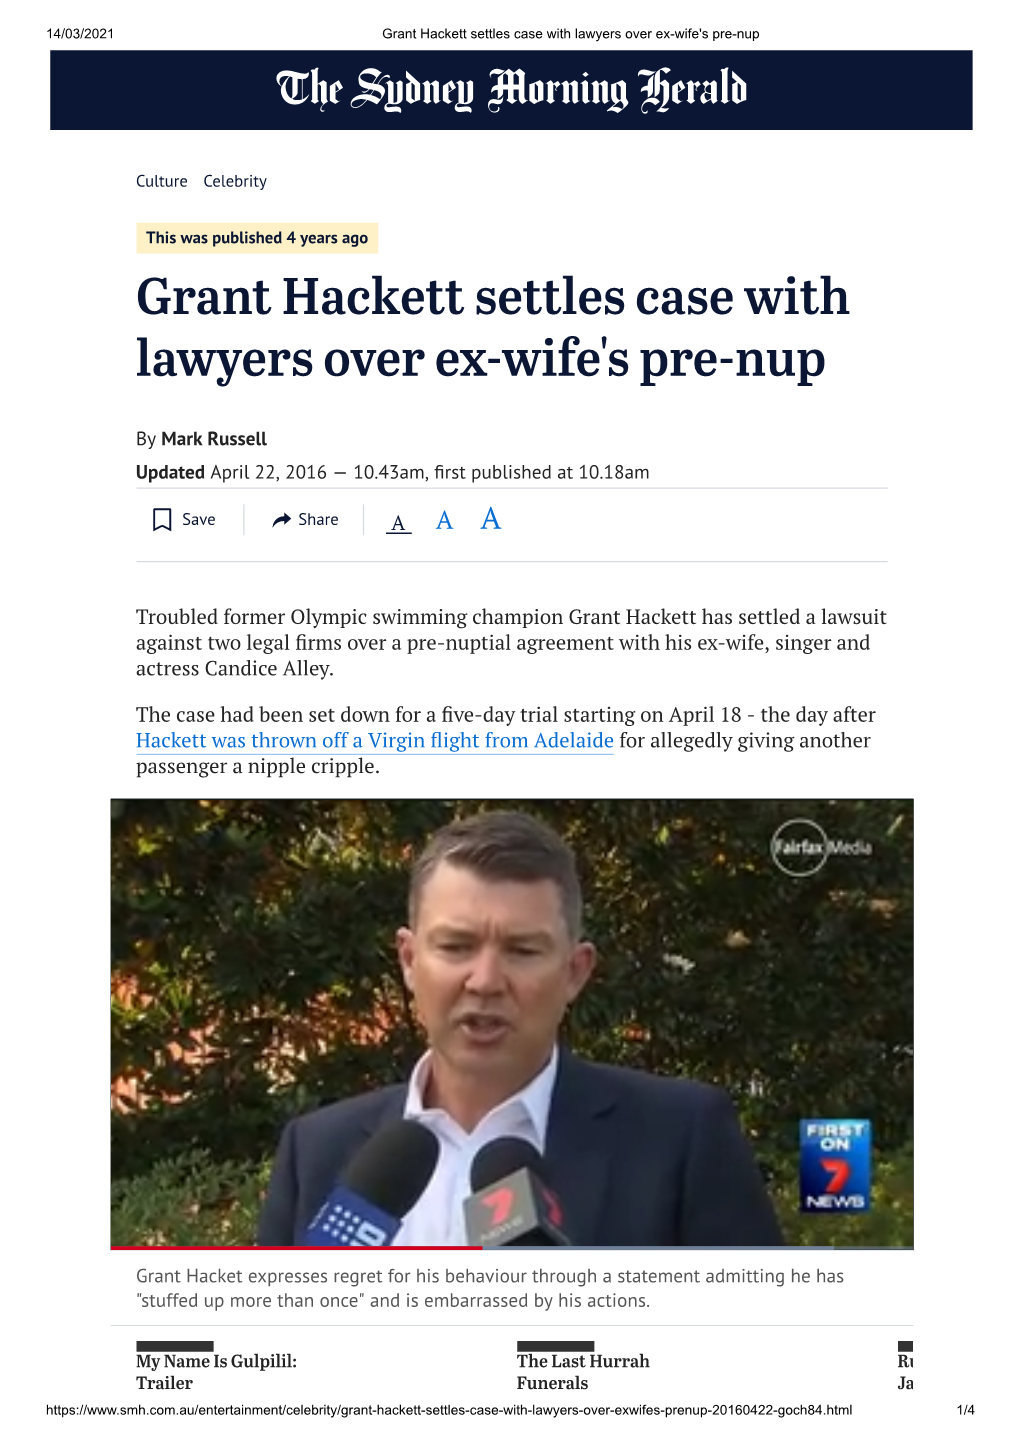 Grant Hackett Settles Case with Lawyers Over Ex-Wife's Pre-Nup